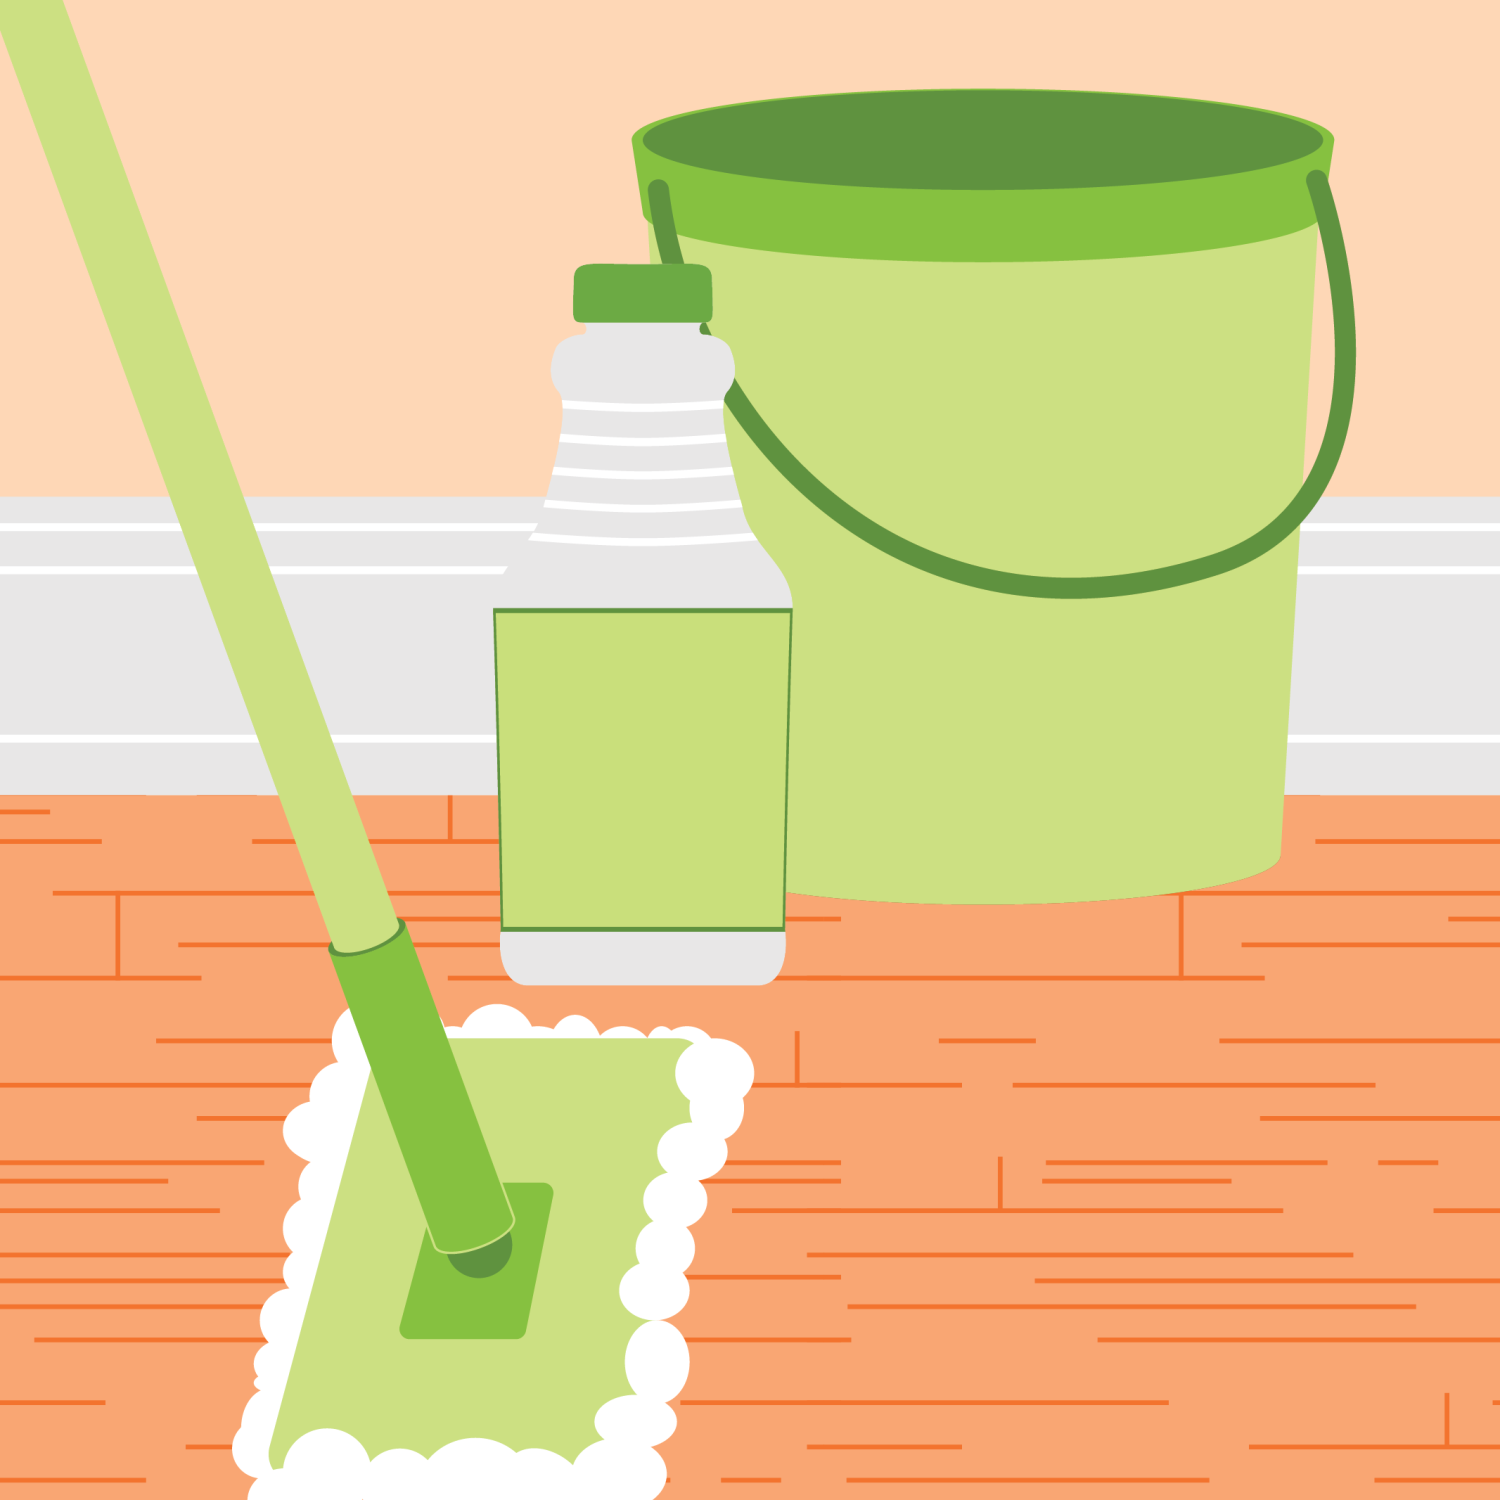 homemade products floor cleaner graphic of a green mop and bucket and green and white bottle of cleaner on a wood floor